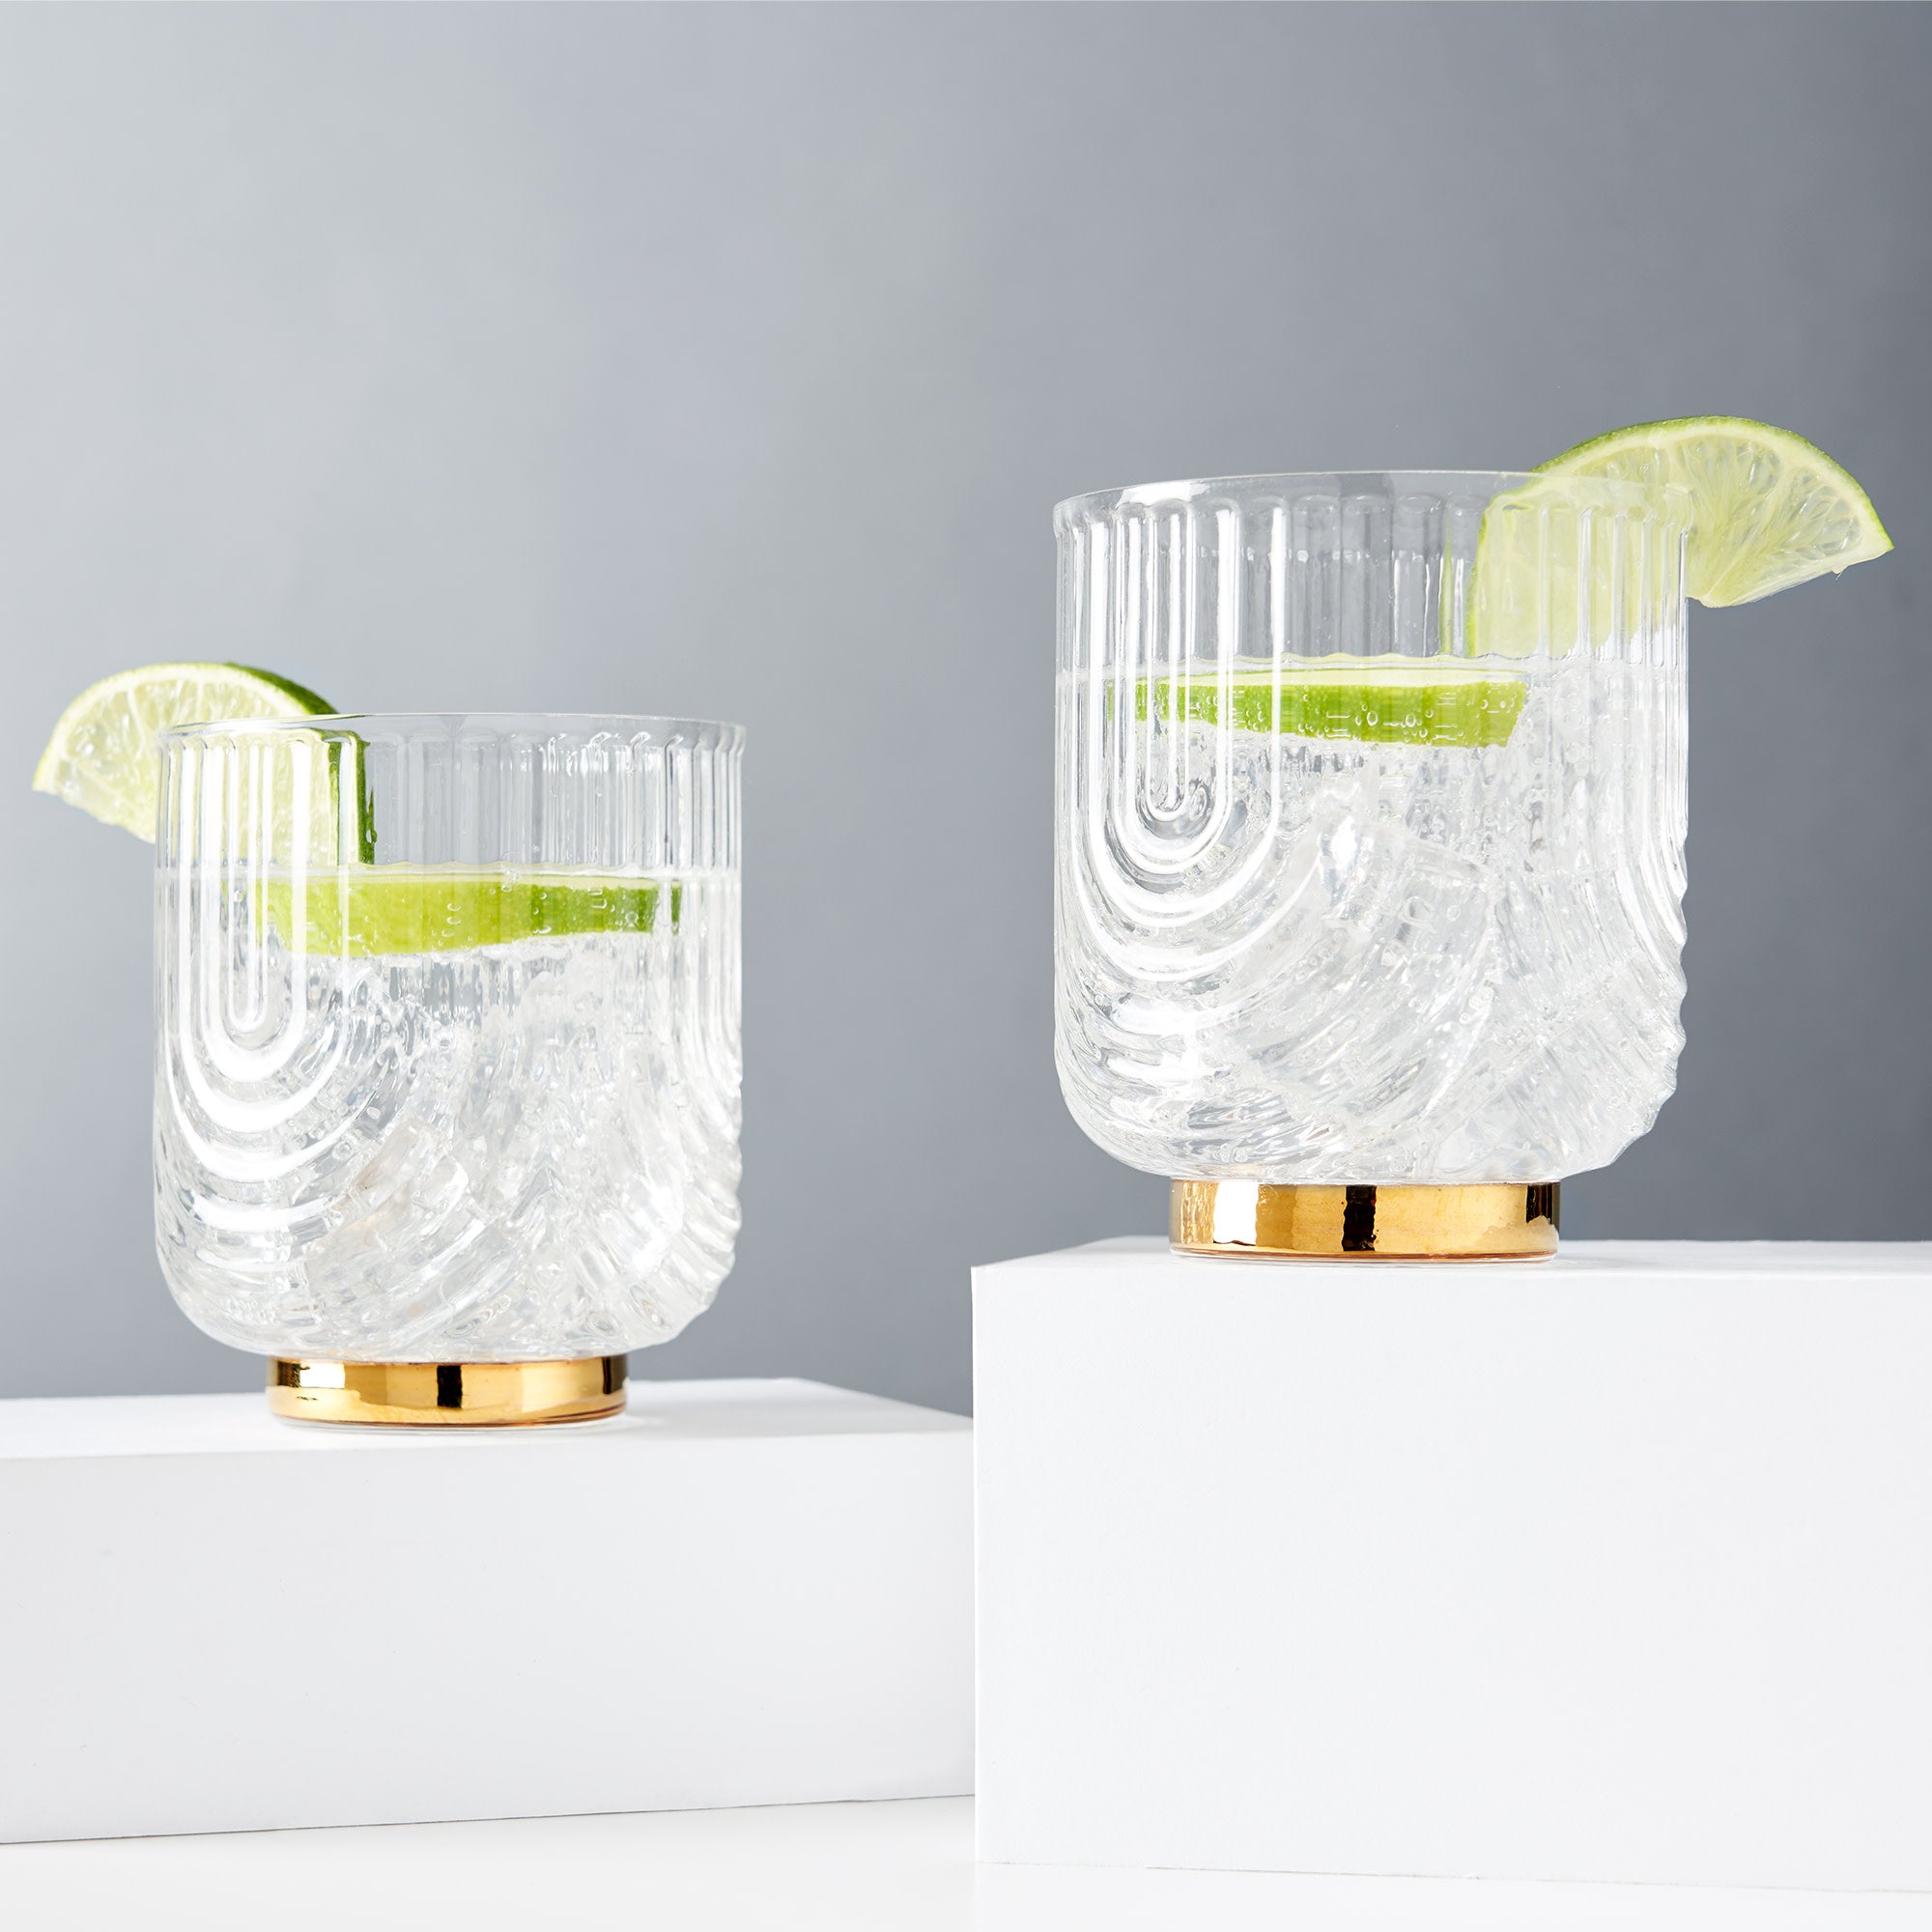 Gatsby Glass Tumblers, Golden Rule Gallery